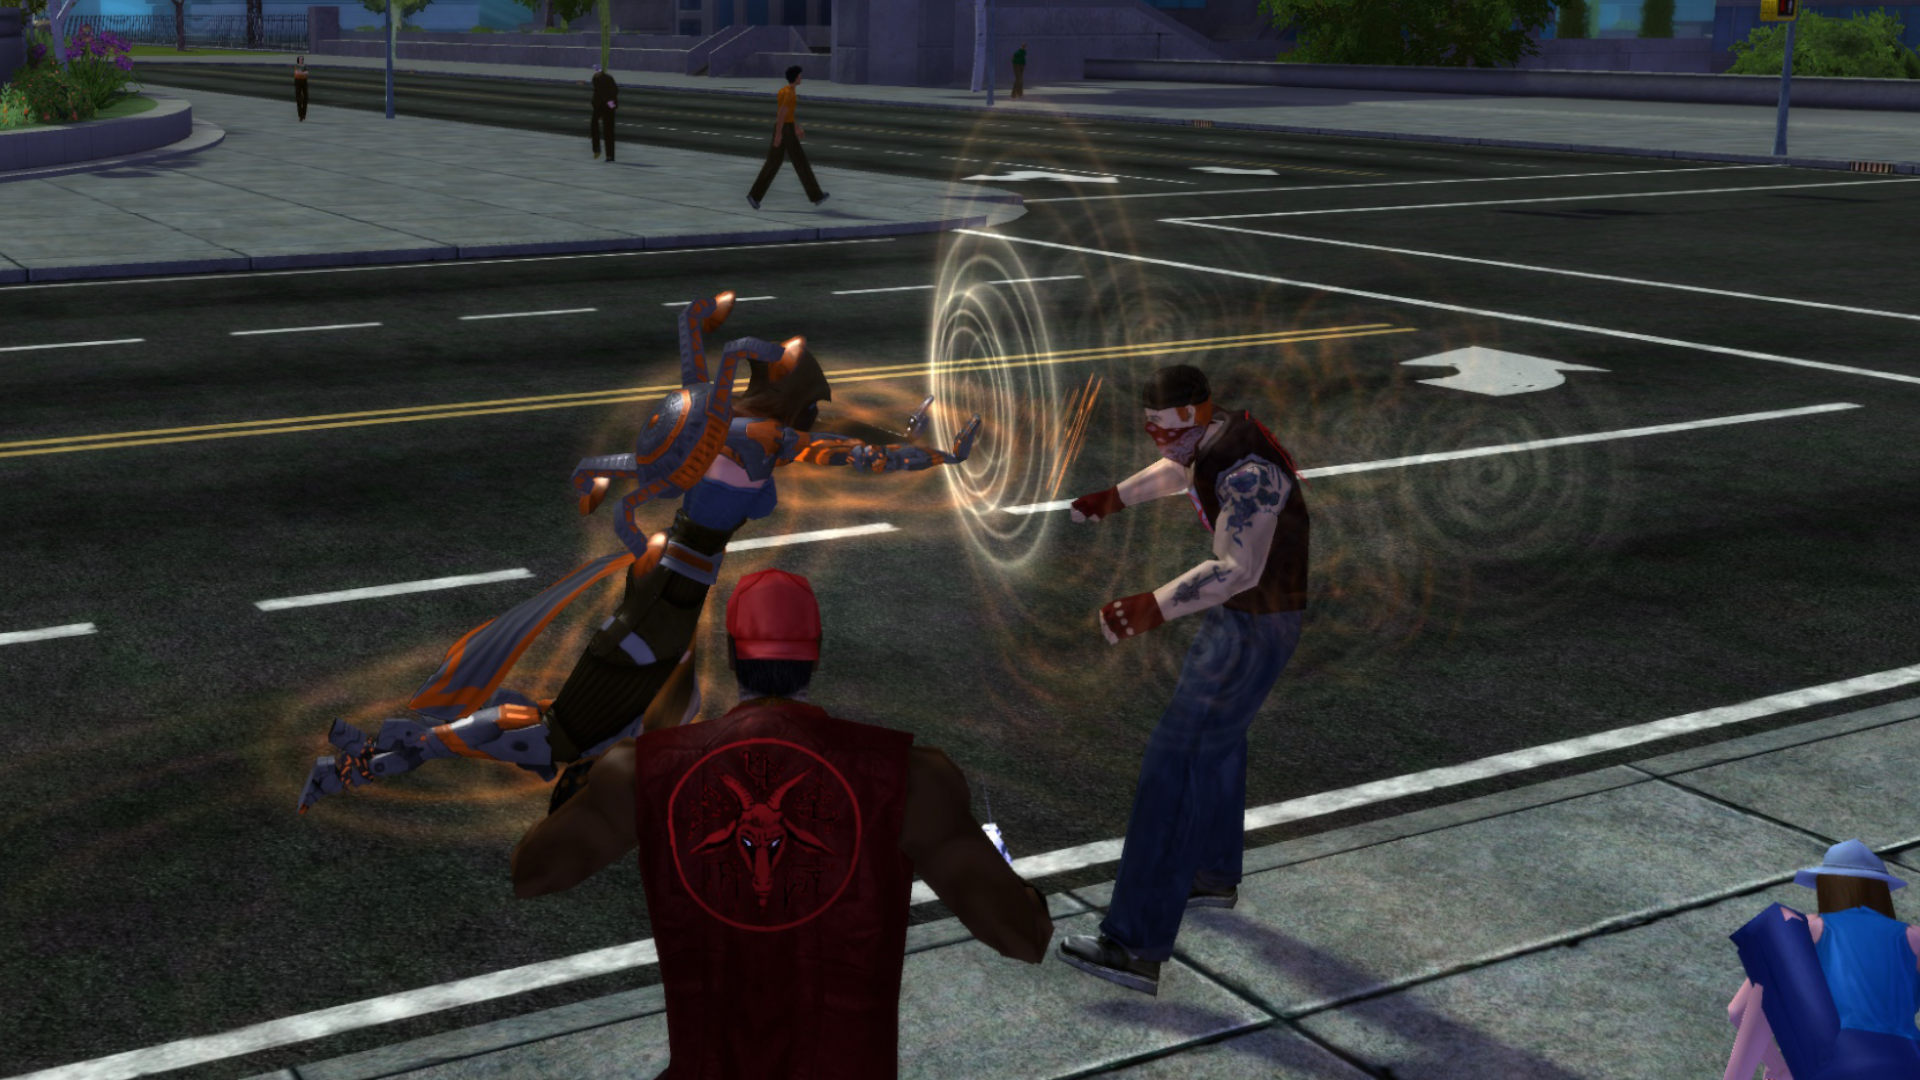 A sonic blast set loose by a hero in City of Heroes.